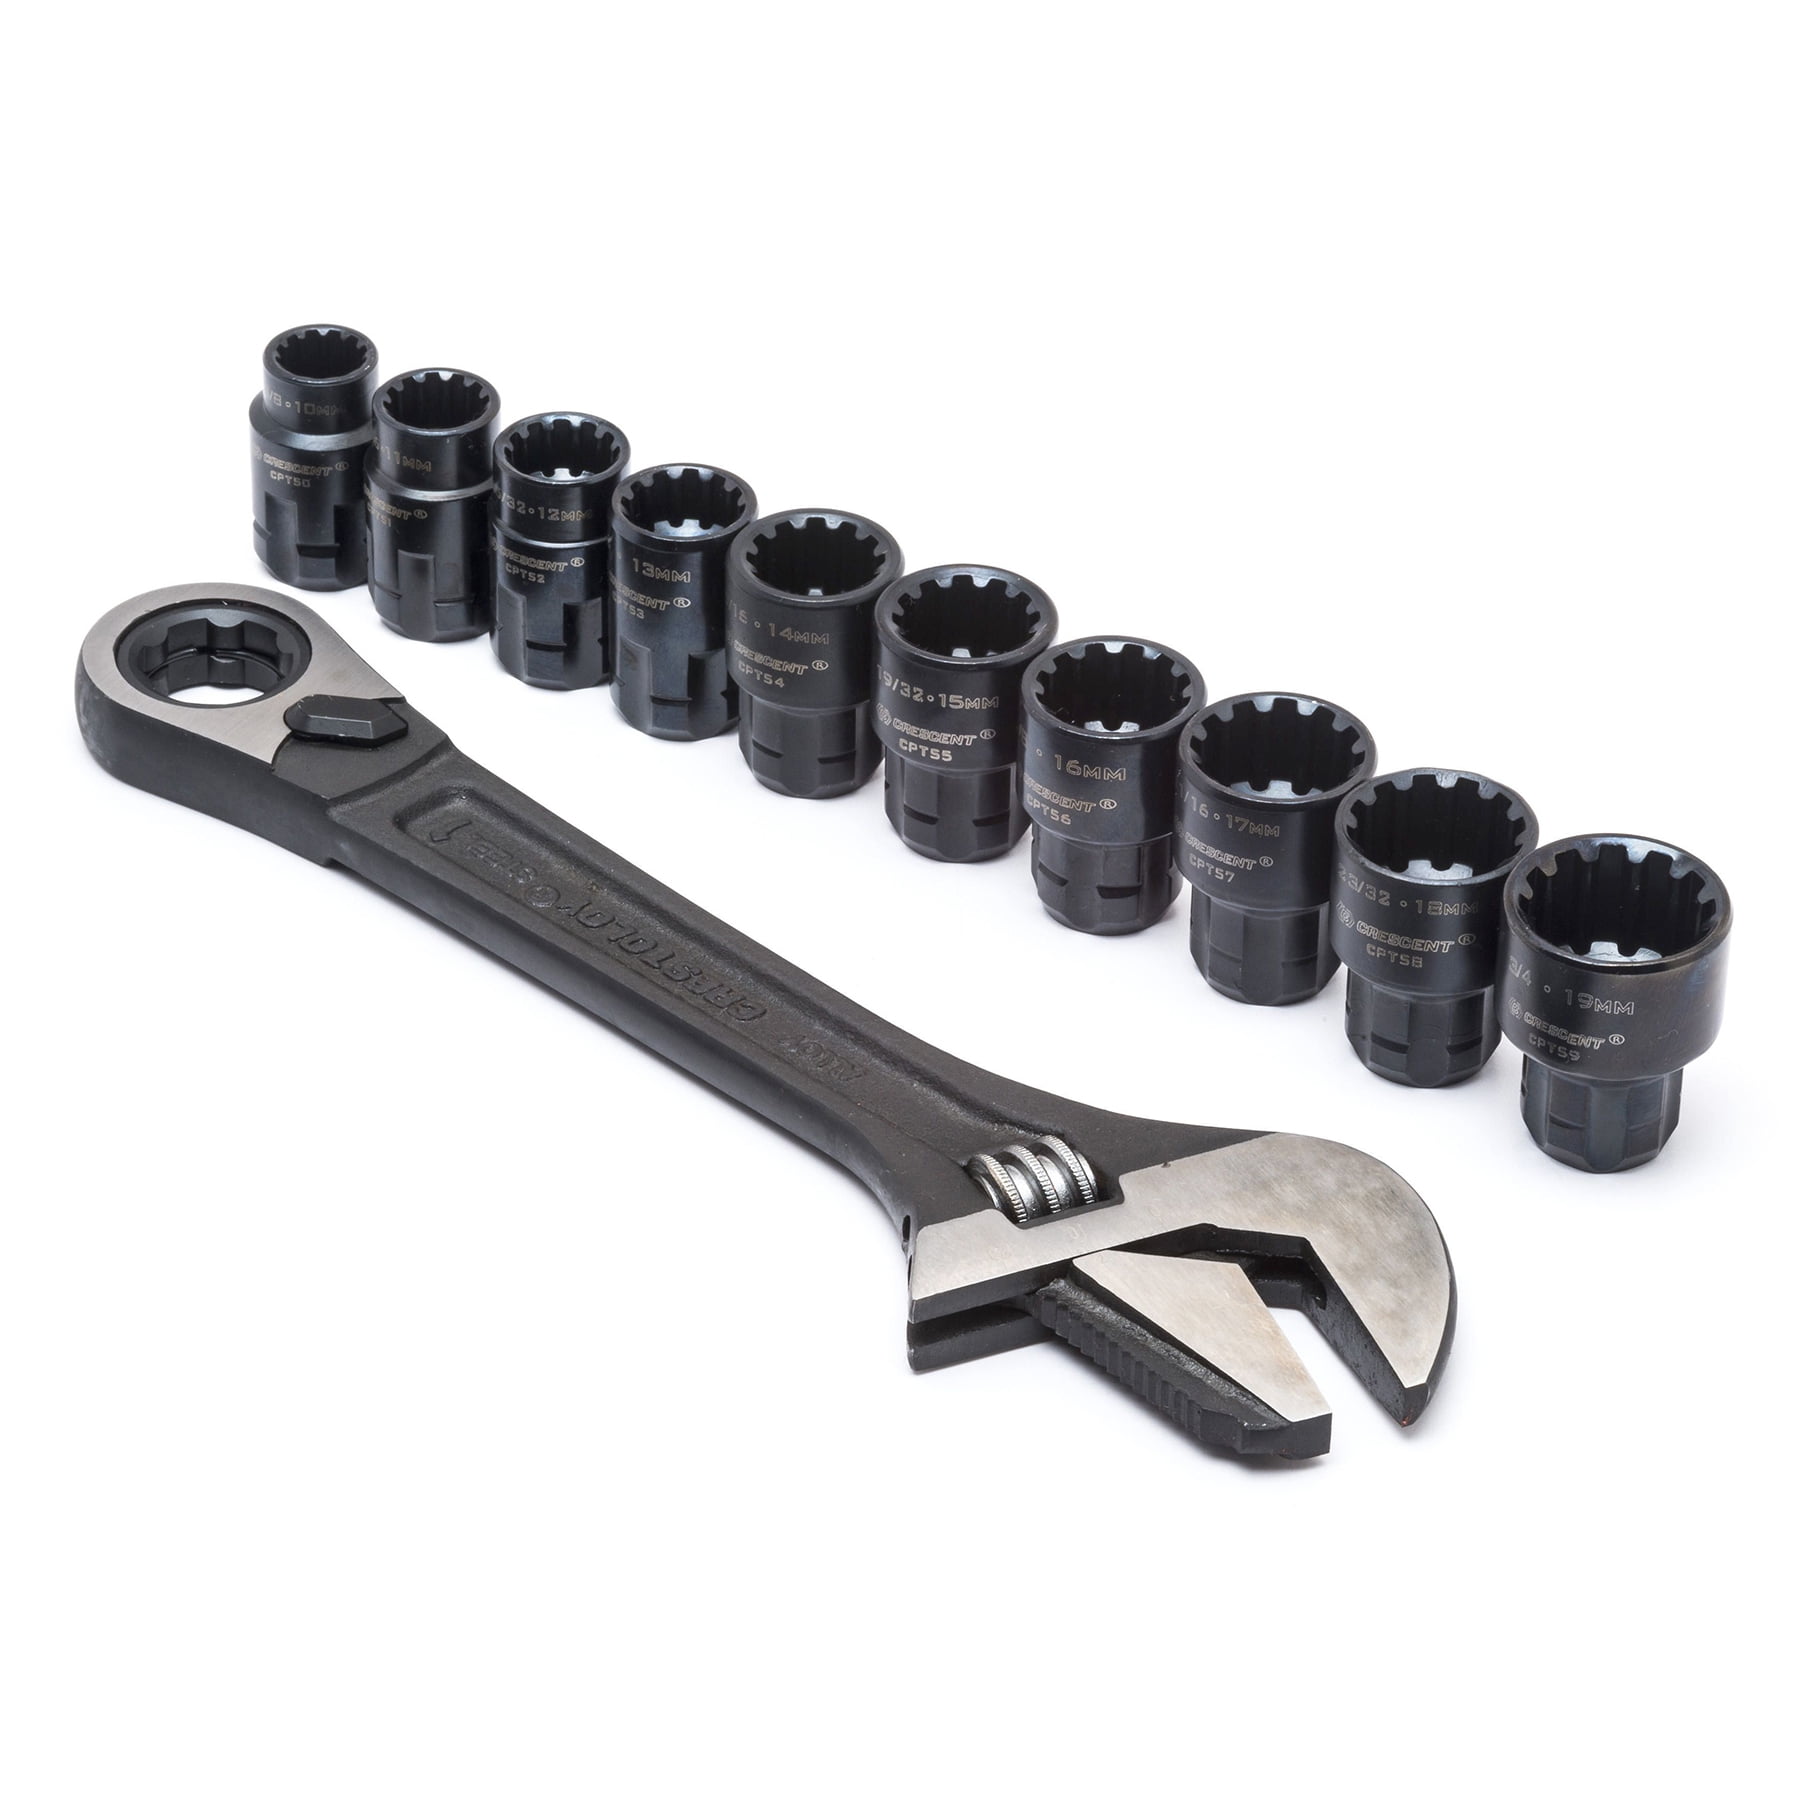 Crescent CPTAW8 11 Pc. Pass-Thru X6 Black Oxide Adjustable Wrench and  Spline Socket Set